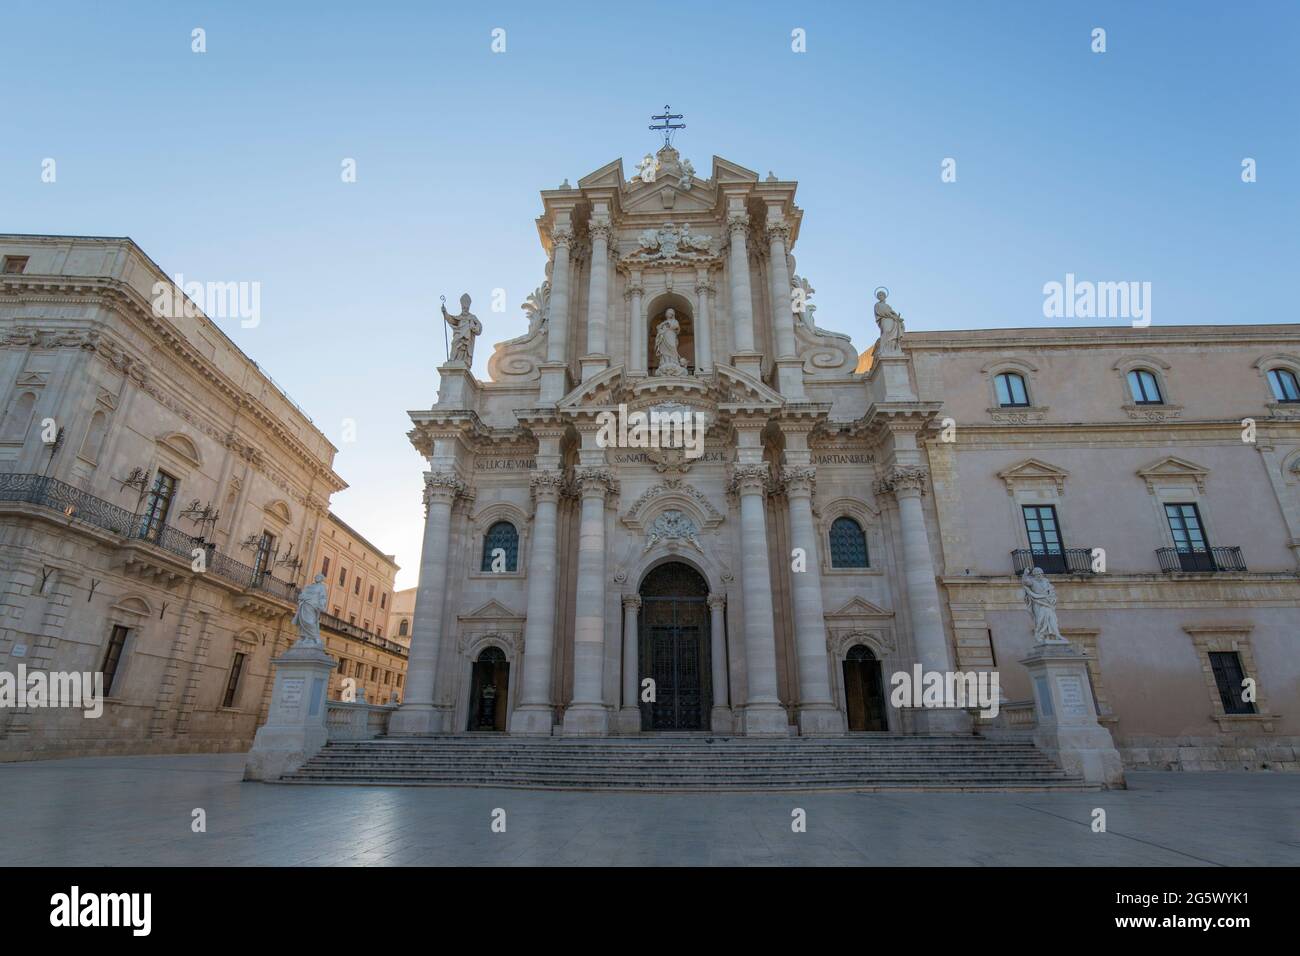 Ortygia, Syracuse, Sicily, Italy. View across Piazza del Duomo to the richly decorated baroque façade of the cathedral, sunrise. Stock Photo